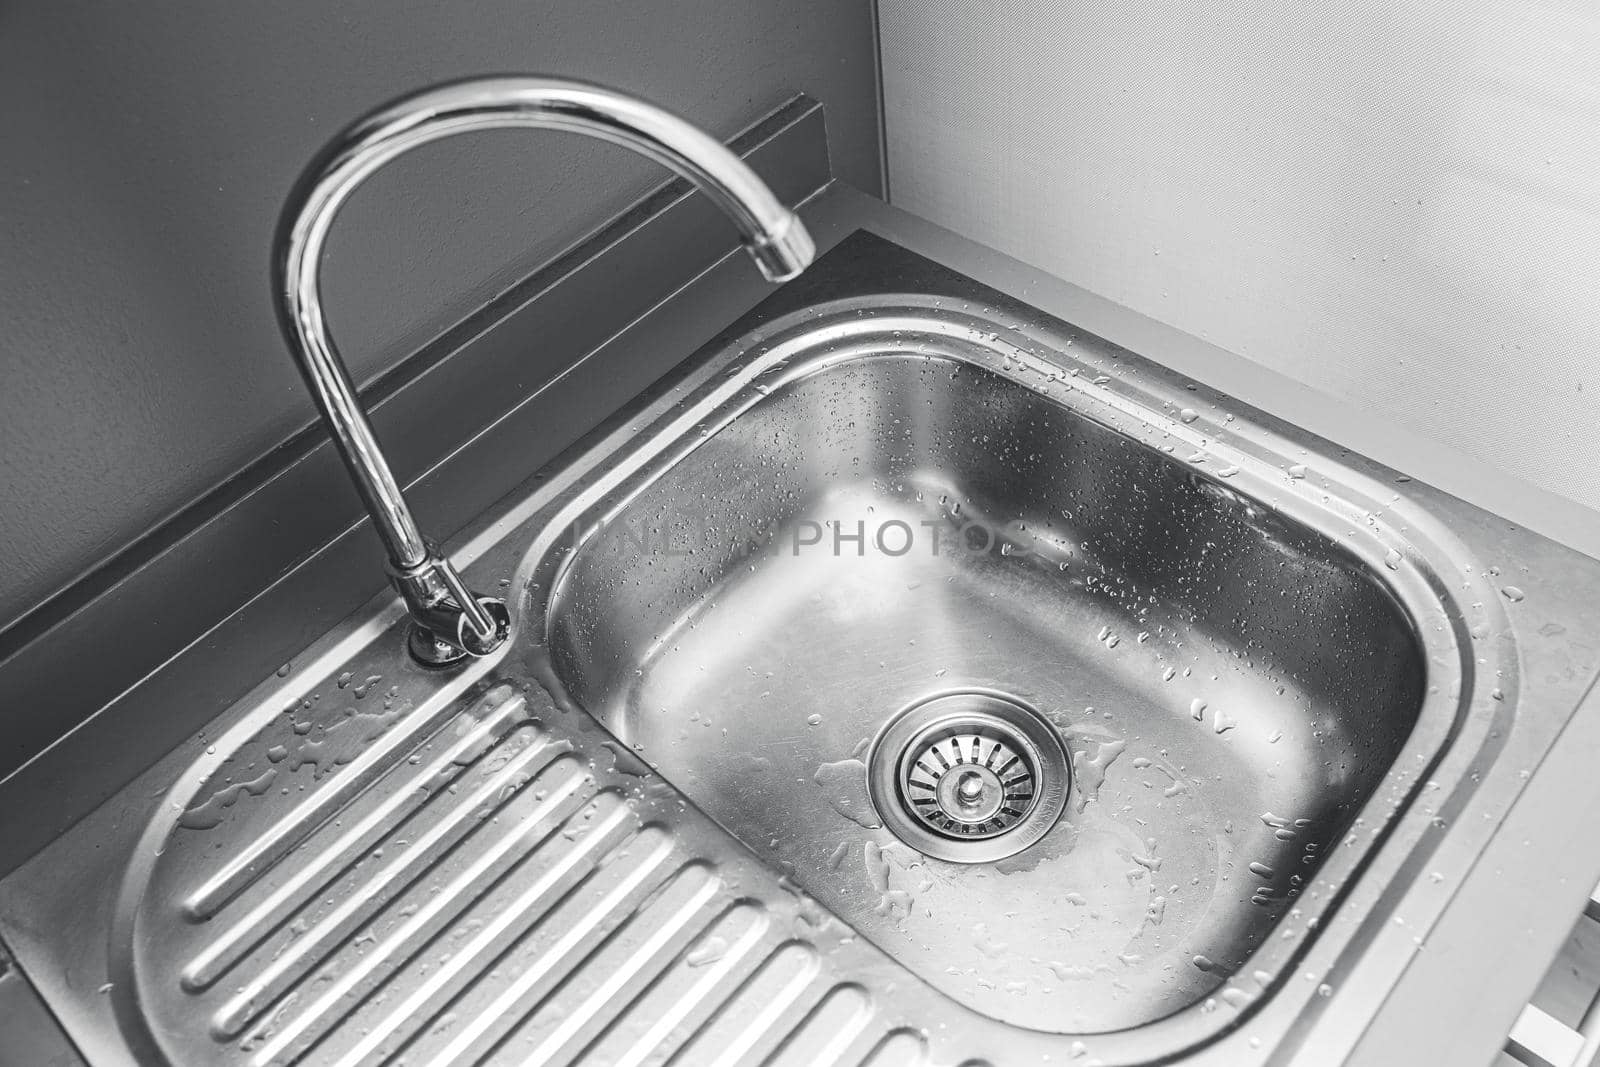 stainless steel sink basin for washing or cleaning utensil in the kitchen by qualitystocks